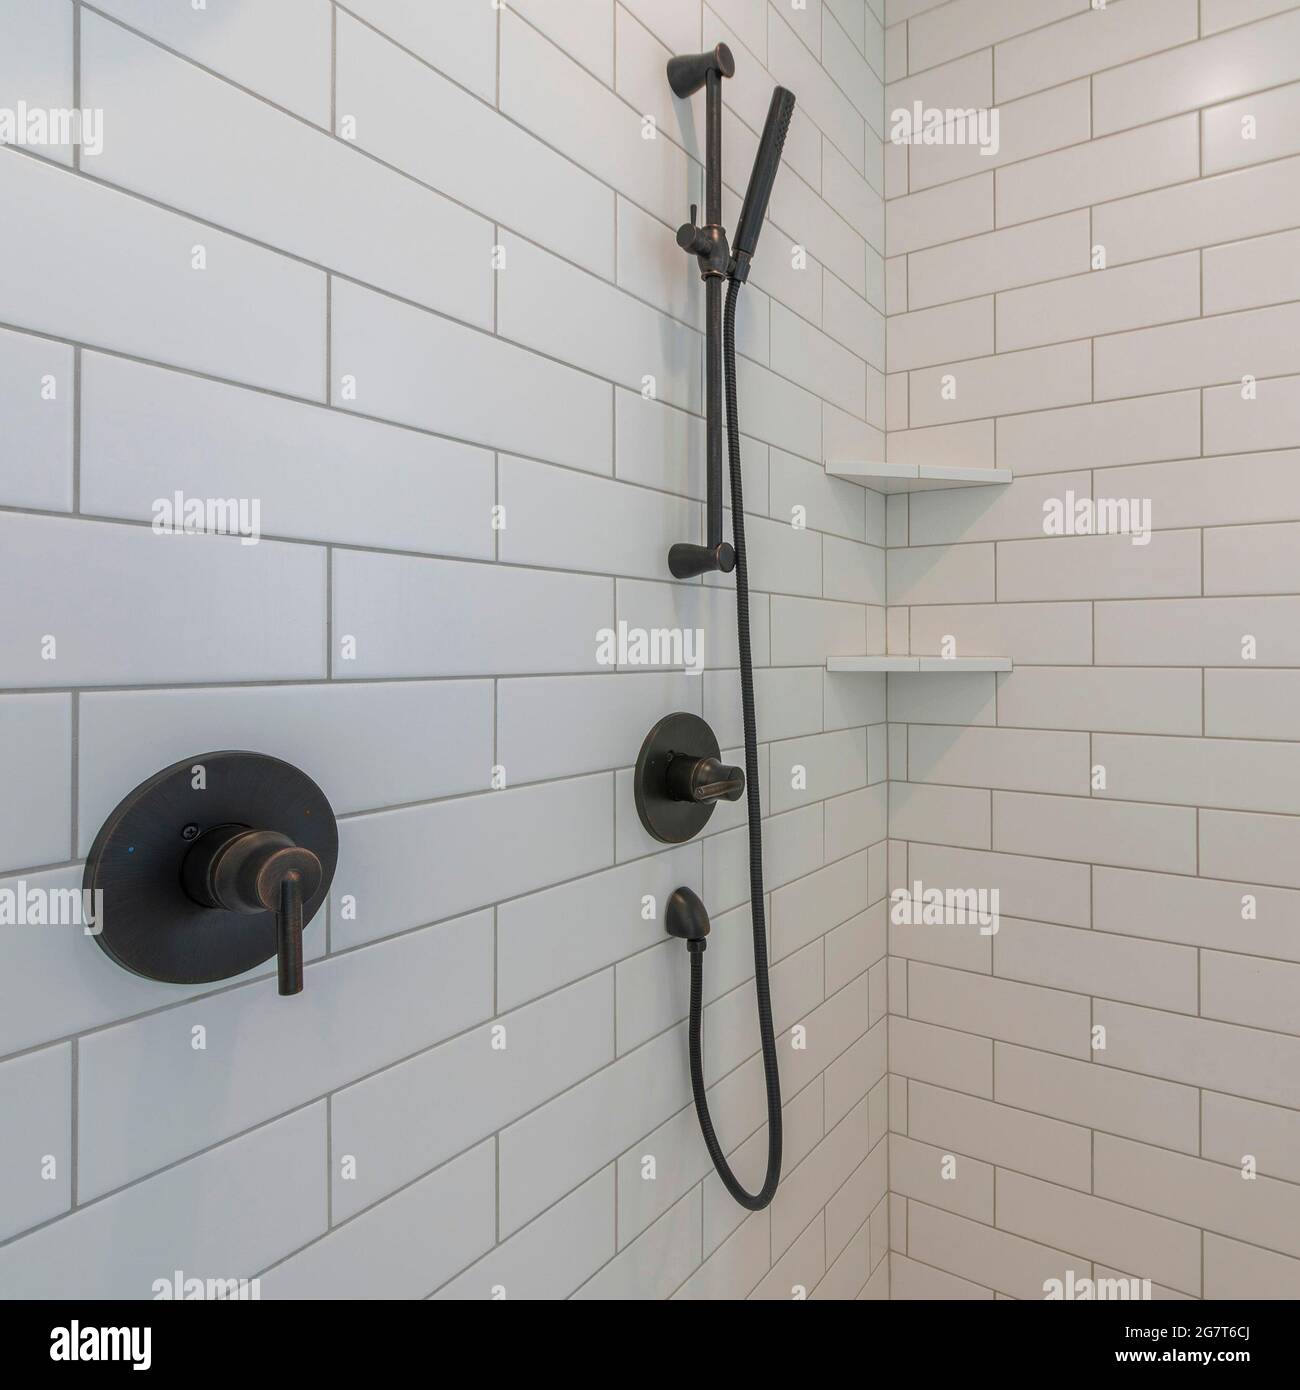 Square frame Inside a shower stall with stick handheld shower head Stock  Photo - Alamy